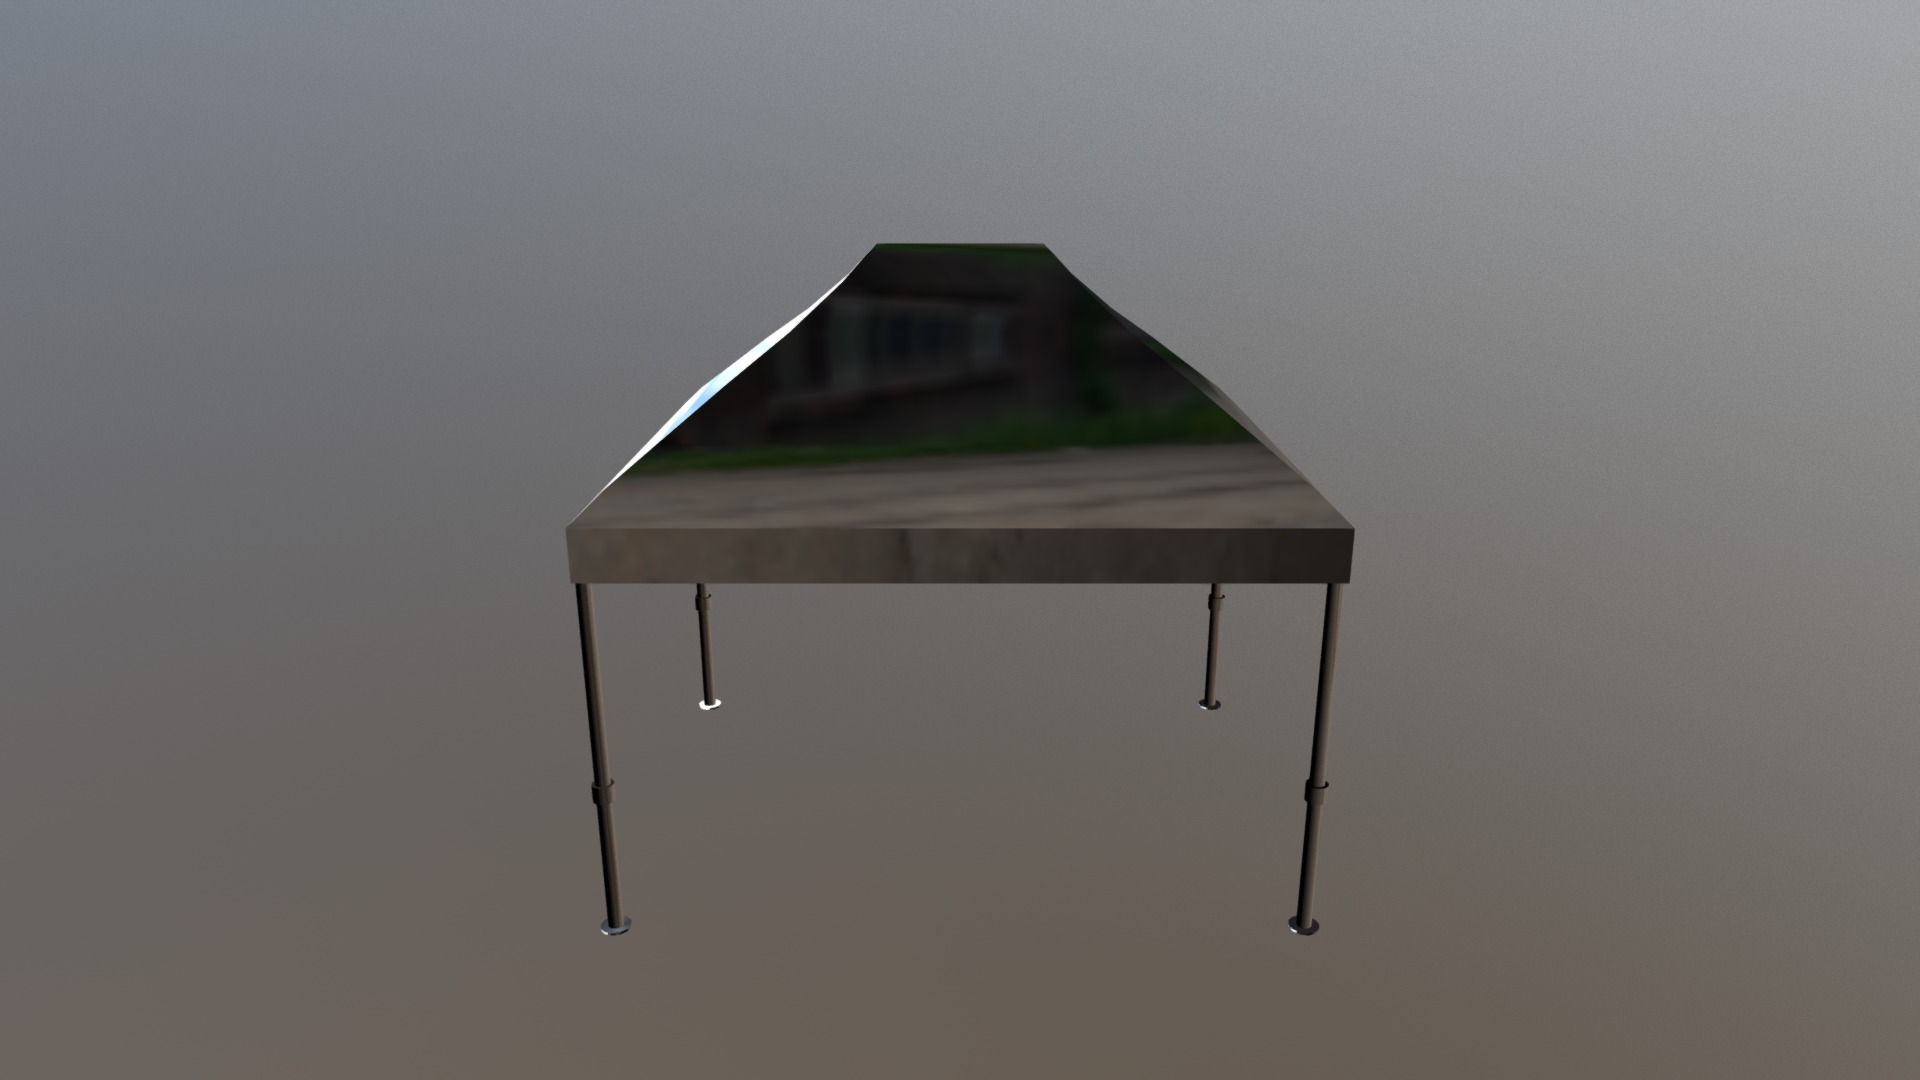 3D model Tent - This is a 3D model of the Tent. The 3D model is about a table with a glass top.